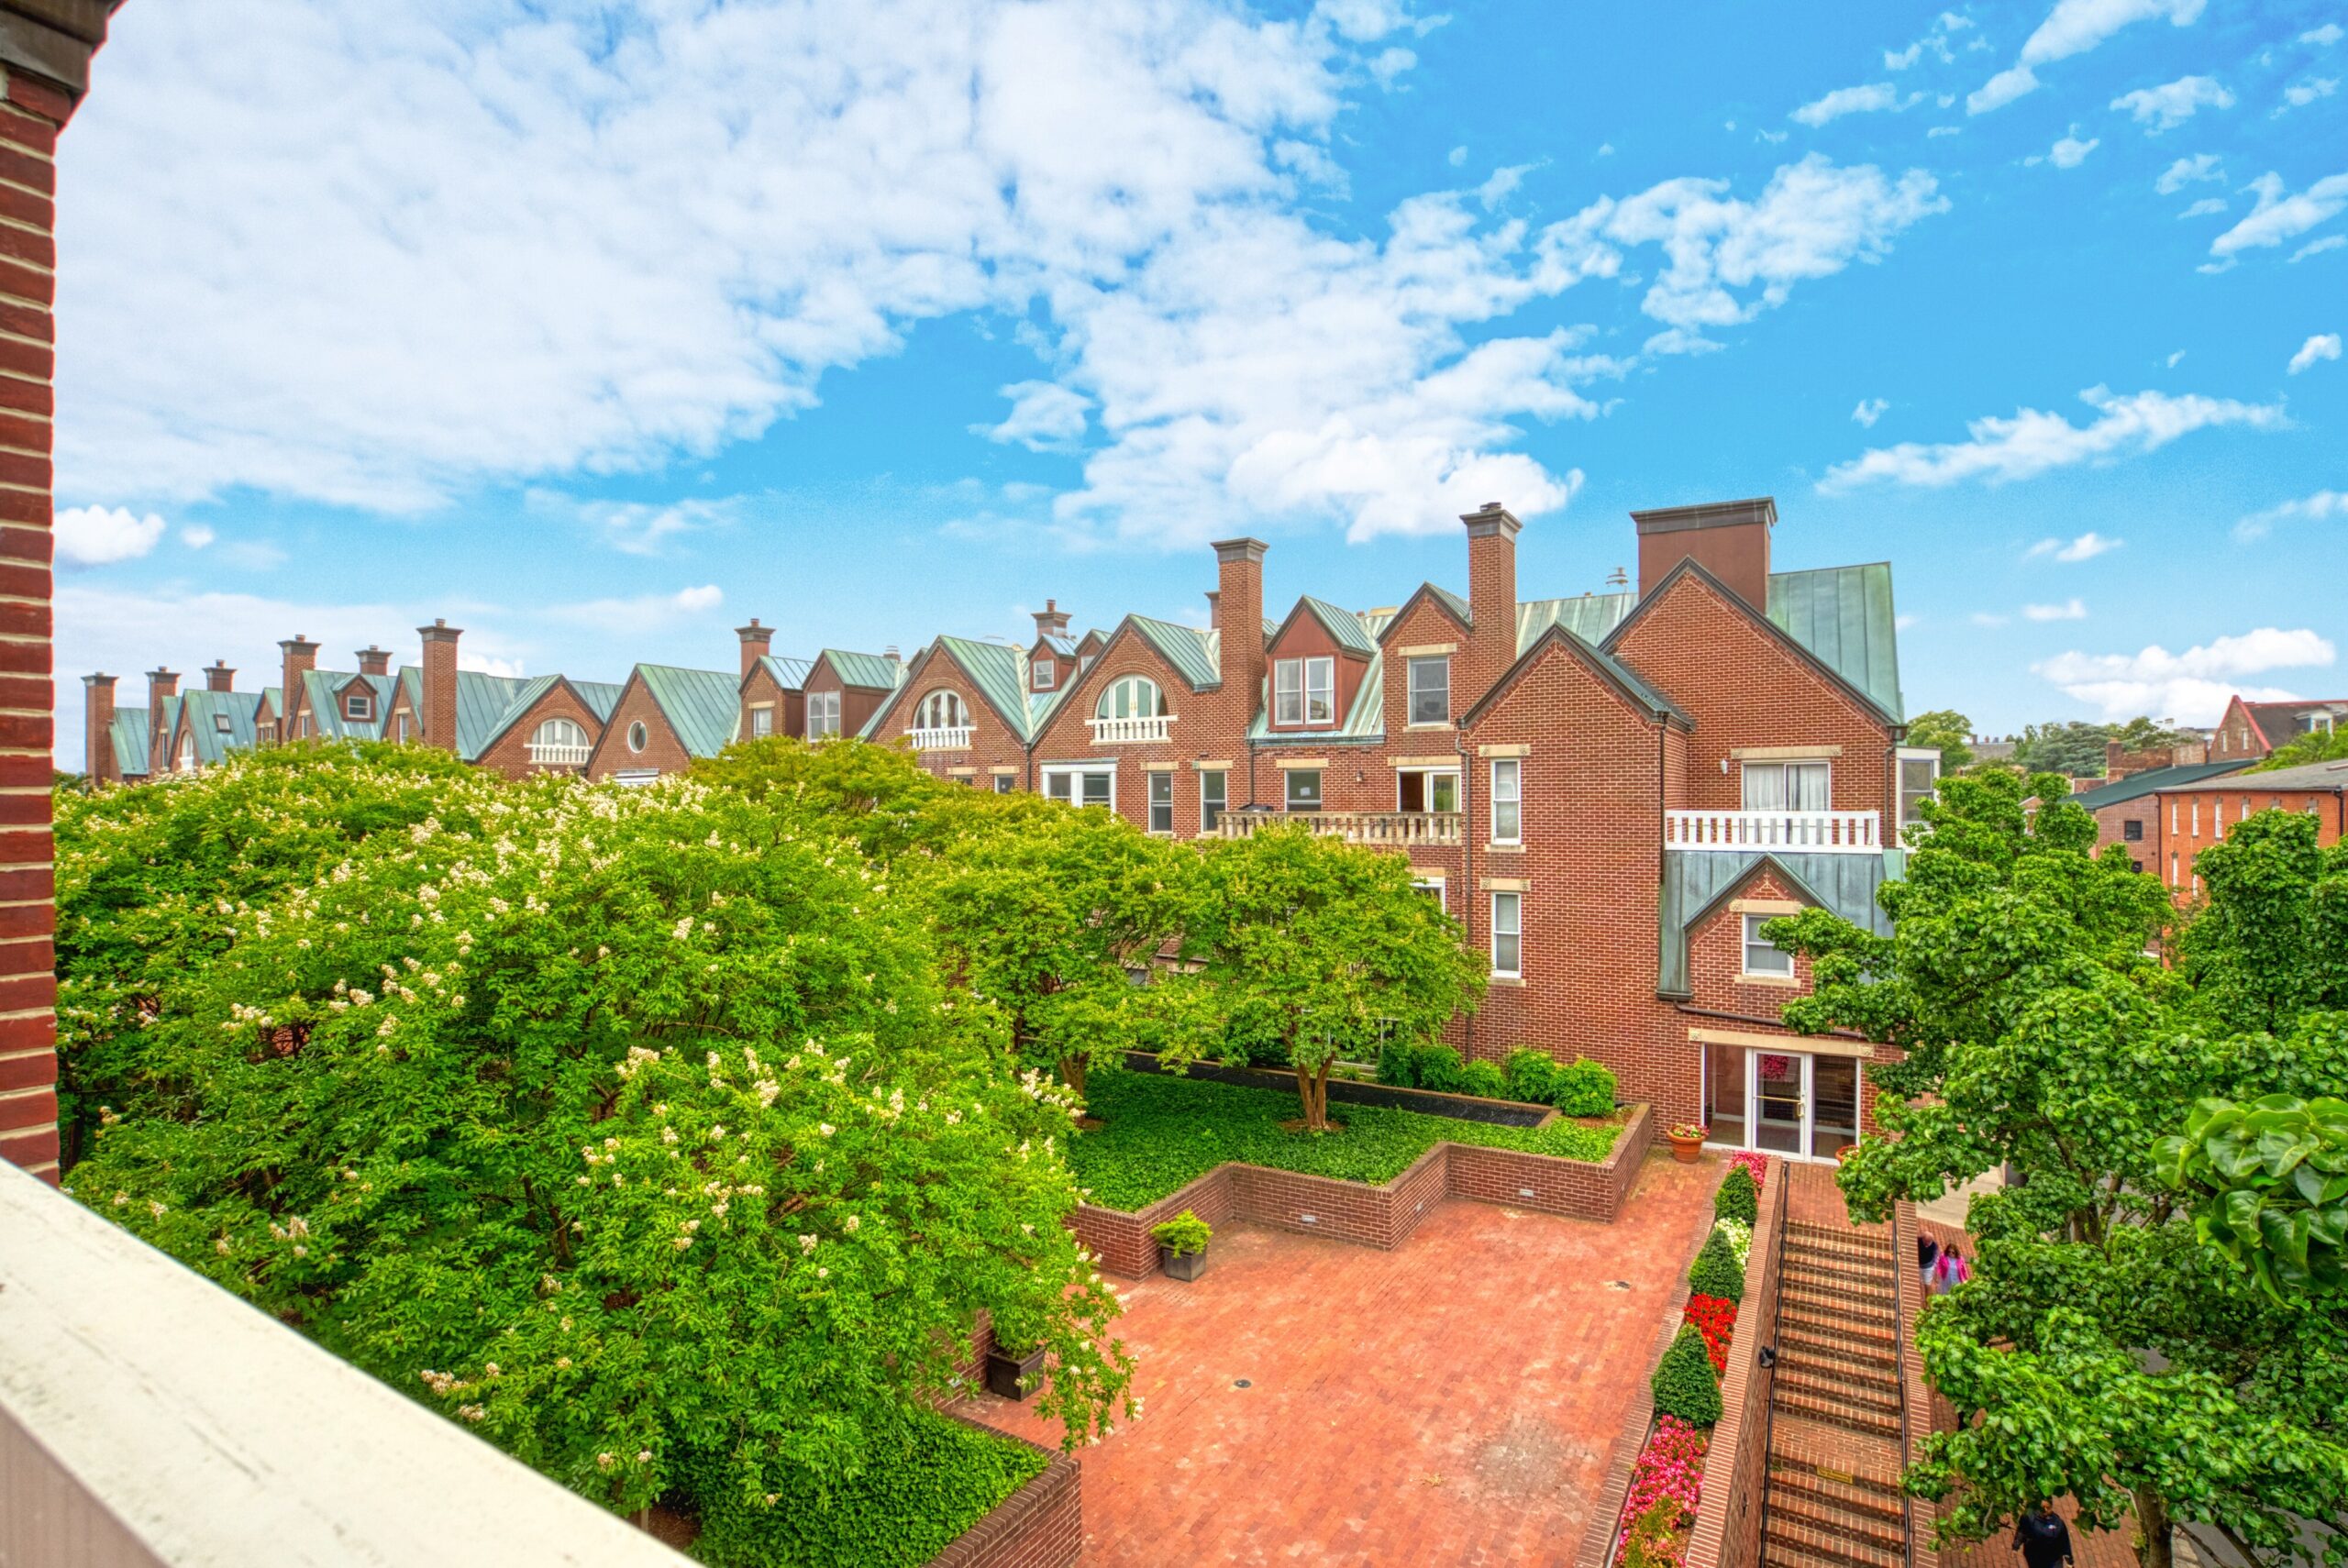 Professional exterior photo of 125 N Lee St, Alexandria, VA - showing the view from the balcony of unit #401 which is a brick courtyard with stairs and mature trees